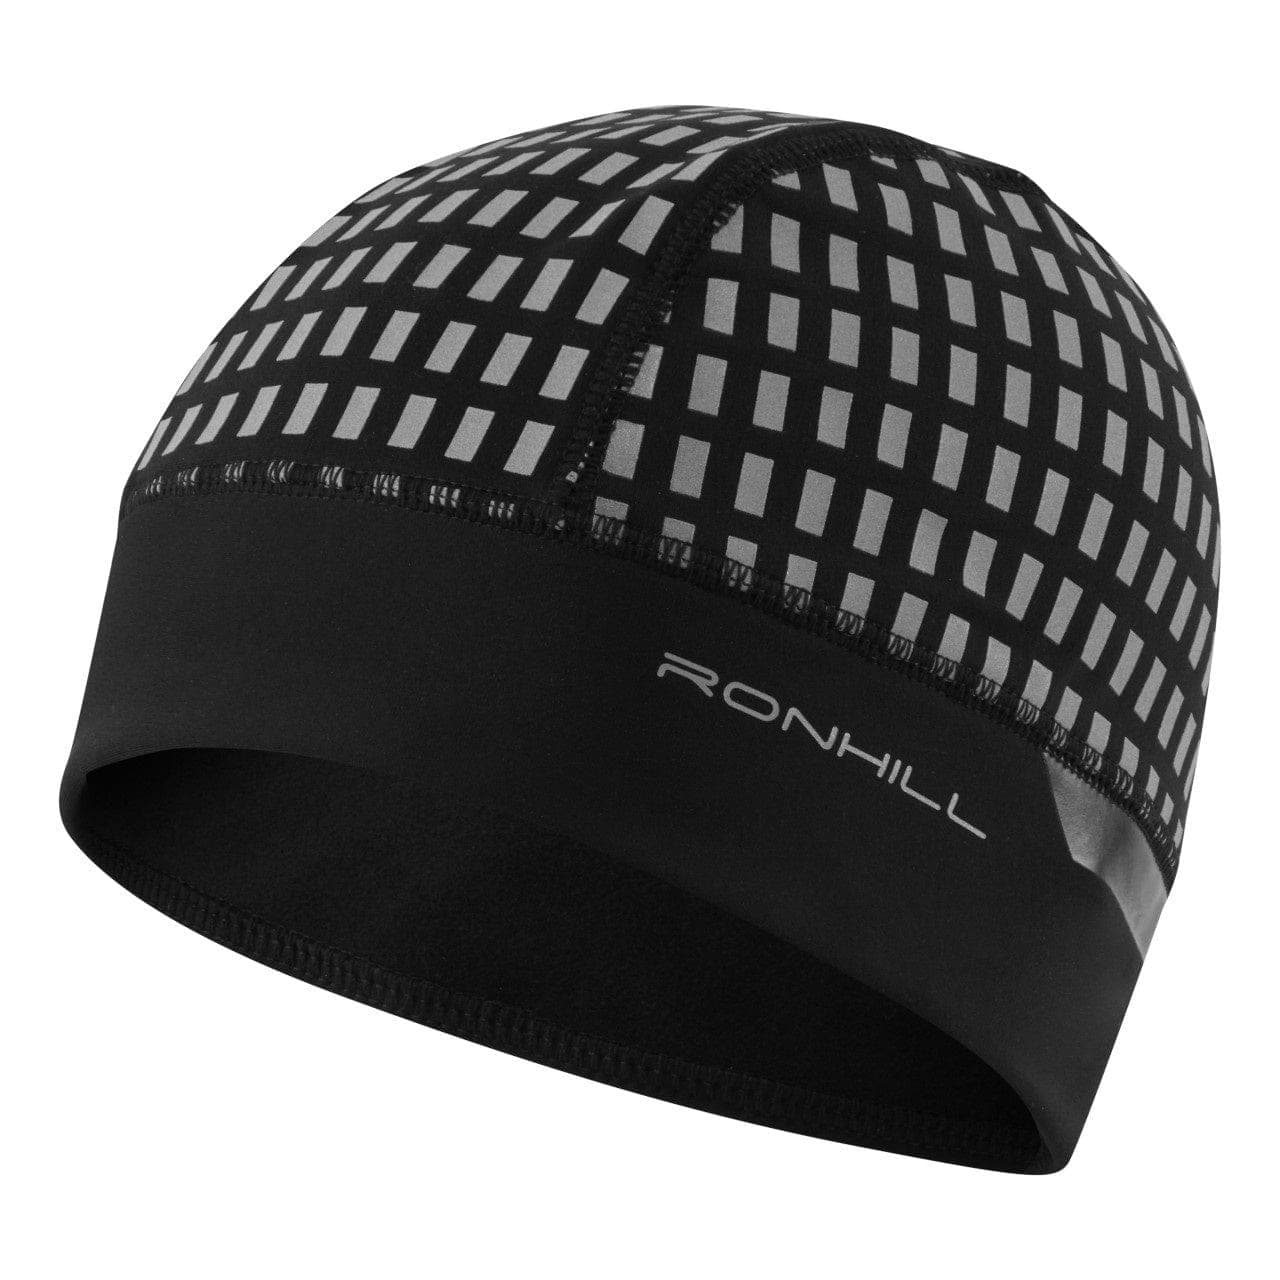 Ronhill Afterhours Beanie -  Black/White/Reflective